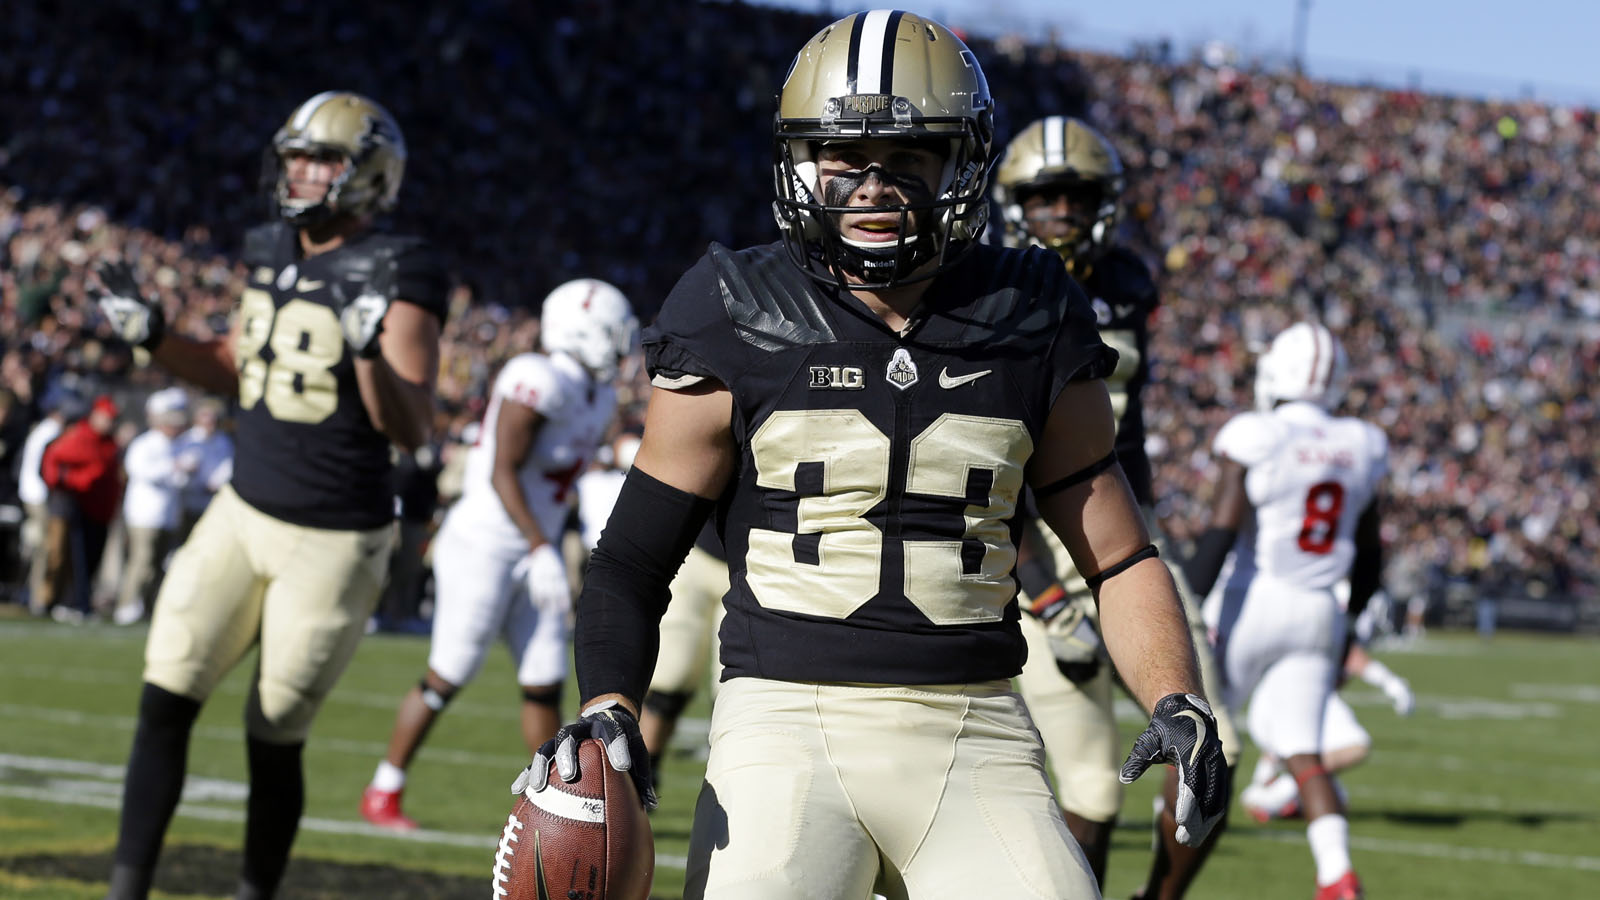 Purdue clinches bowl eligibility with 31-24 win over Indiana